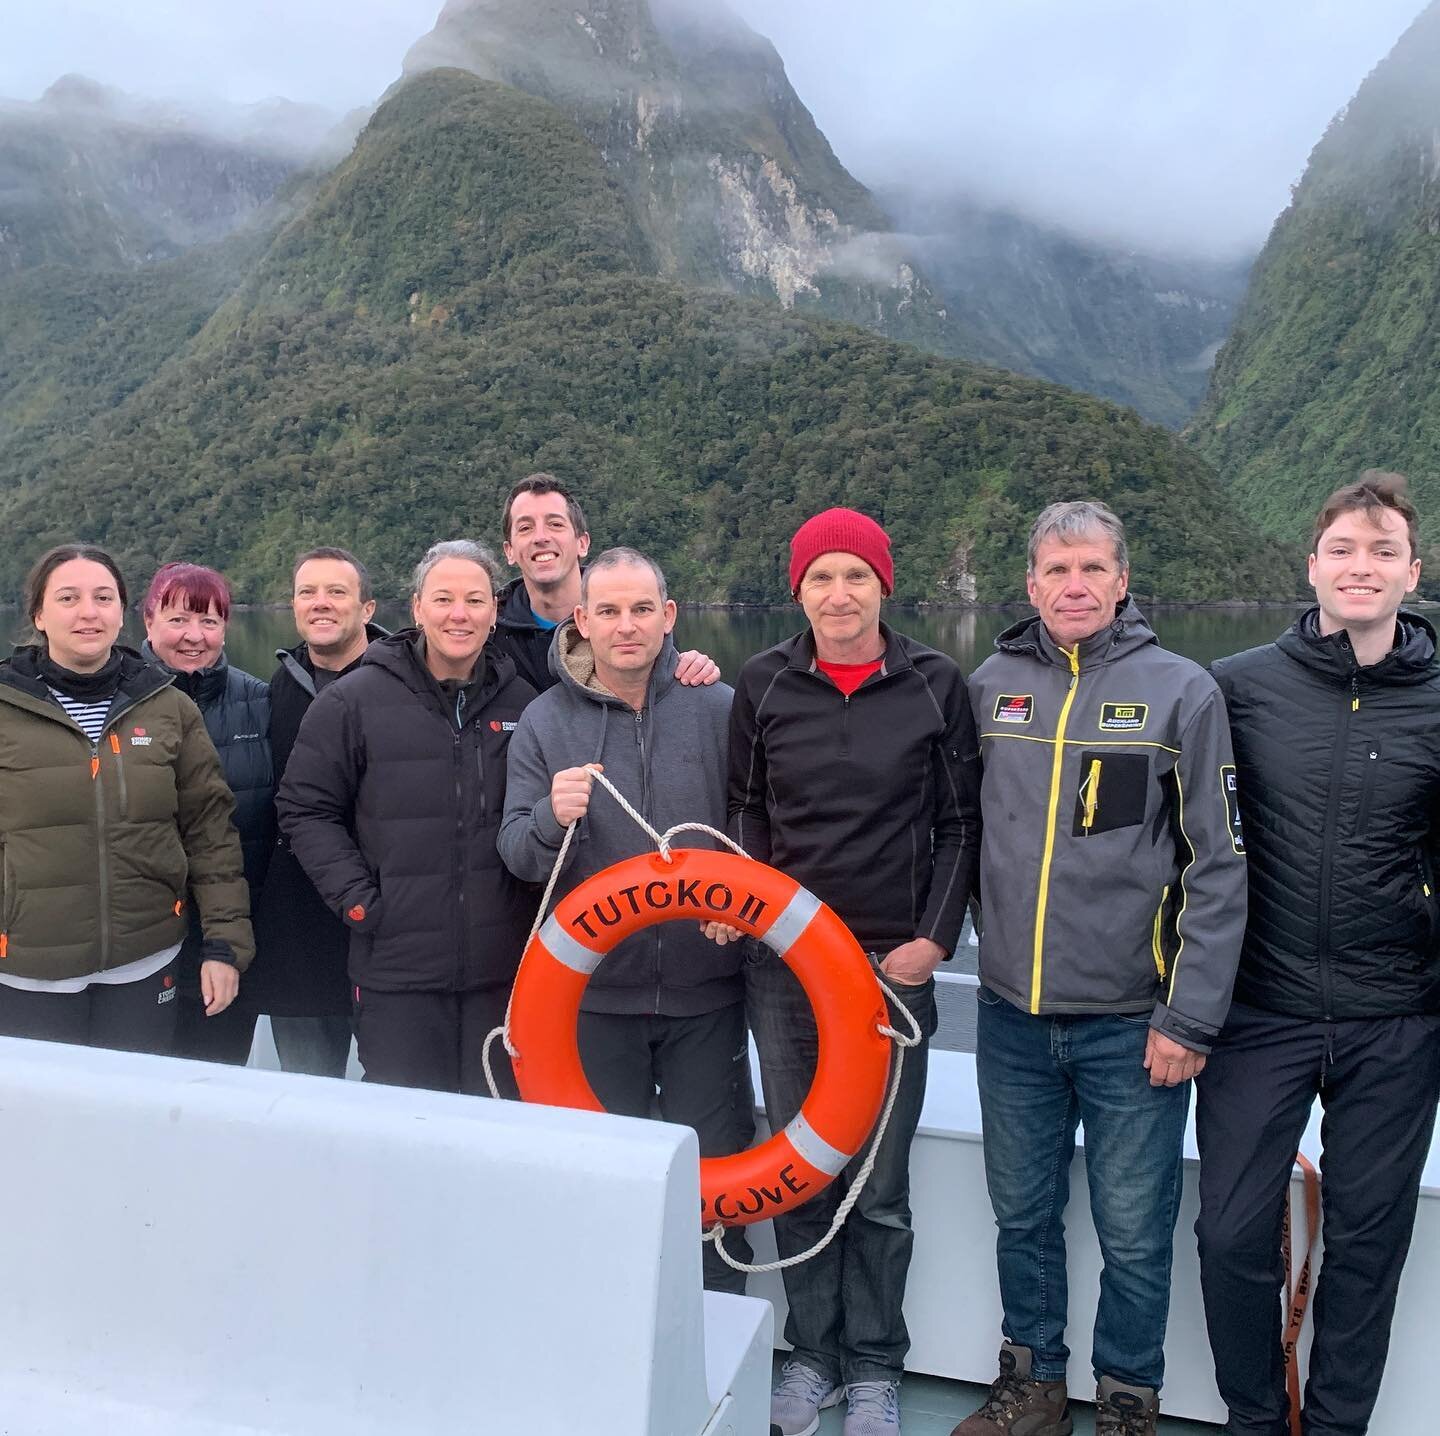 Our first charter group after lockdown our guests were treated to Fiordland&rsquo;s amazing views above and below the waves #fiordland #divefiordland #divenowwhangarei #divenow #divecharter #teanau #charterboat #discver #discvereryexpeditions #myback